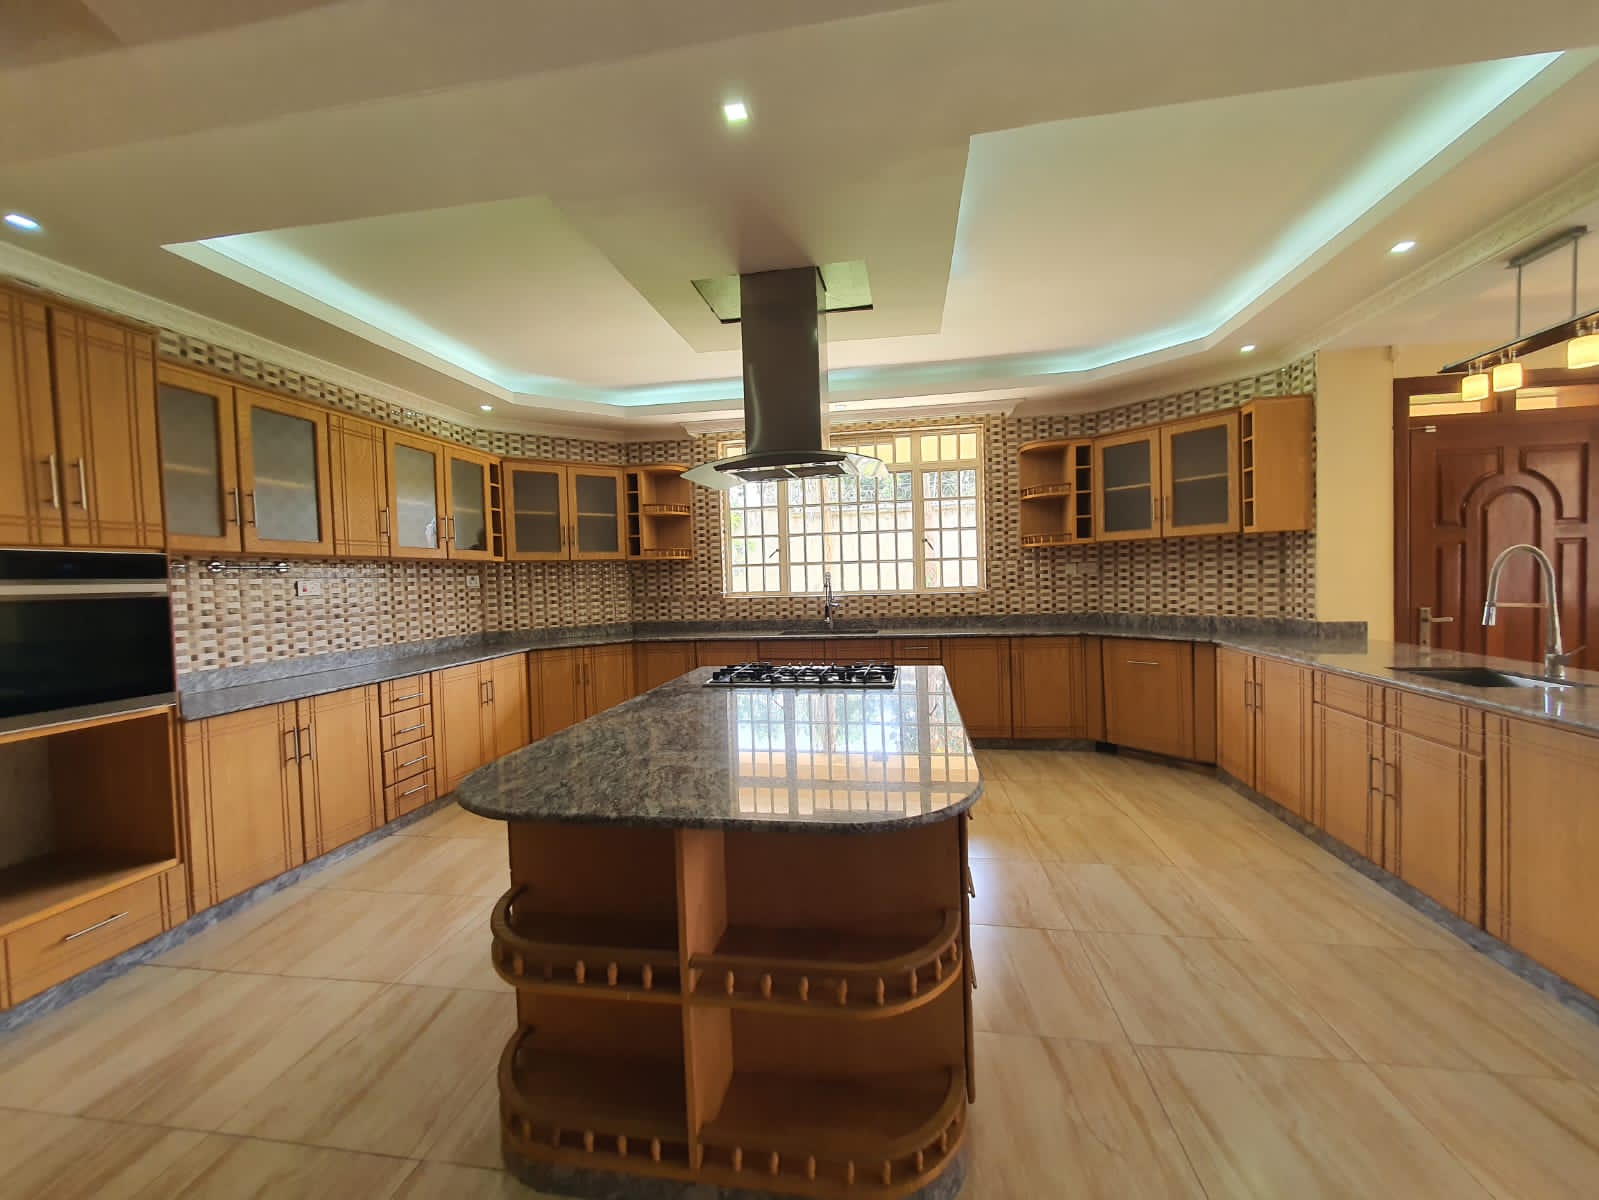 Lovely 8 Bedroom House For Rent with a Guest Wing in Runda, Nairobi. located close to Village Market, UN offices in Nairobi, Gigiri, Schools. Musilli Homes